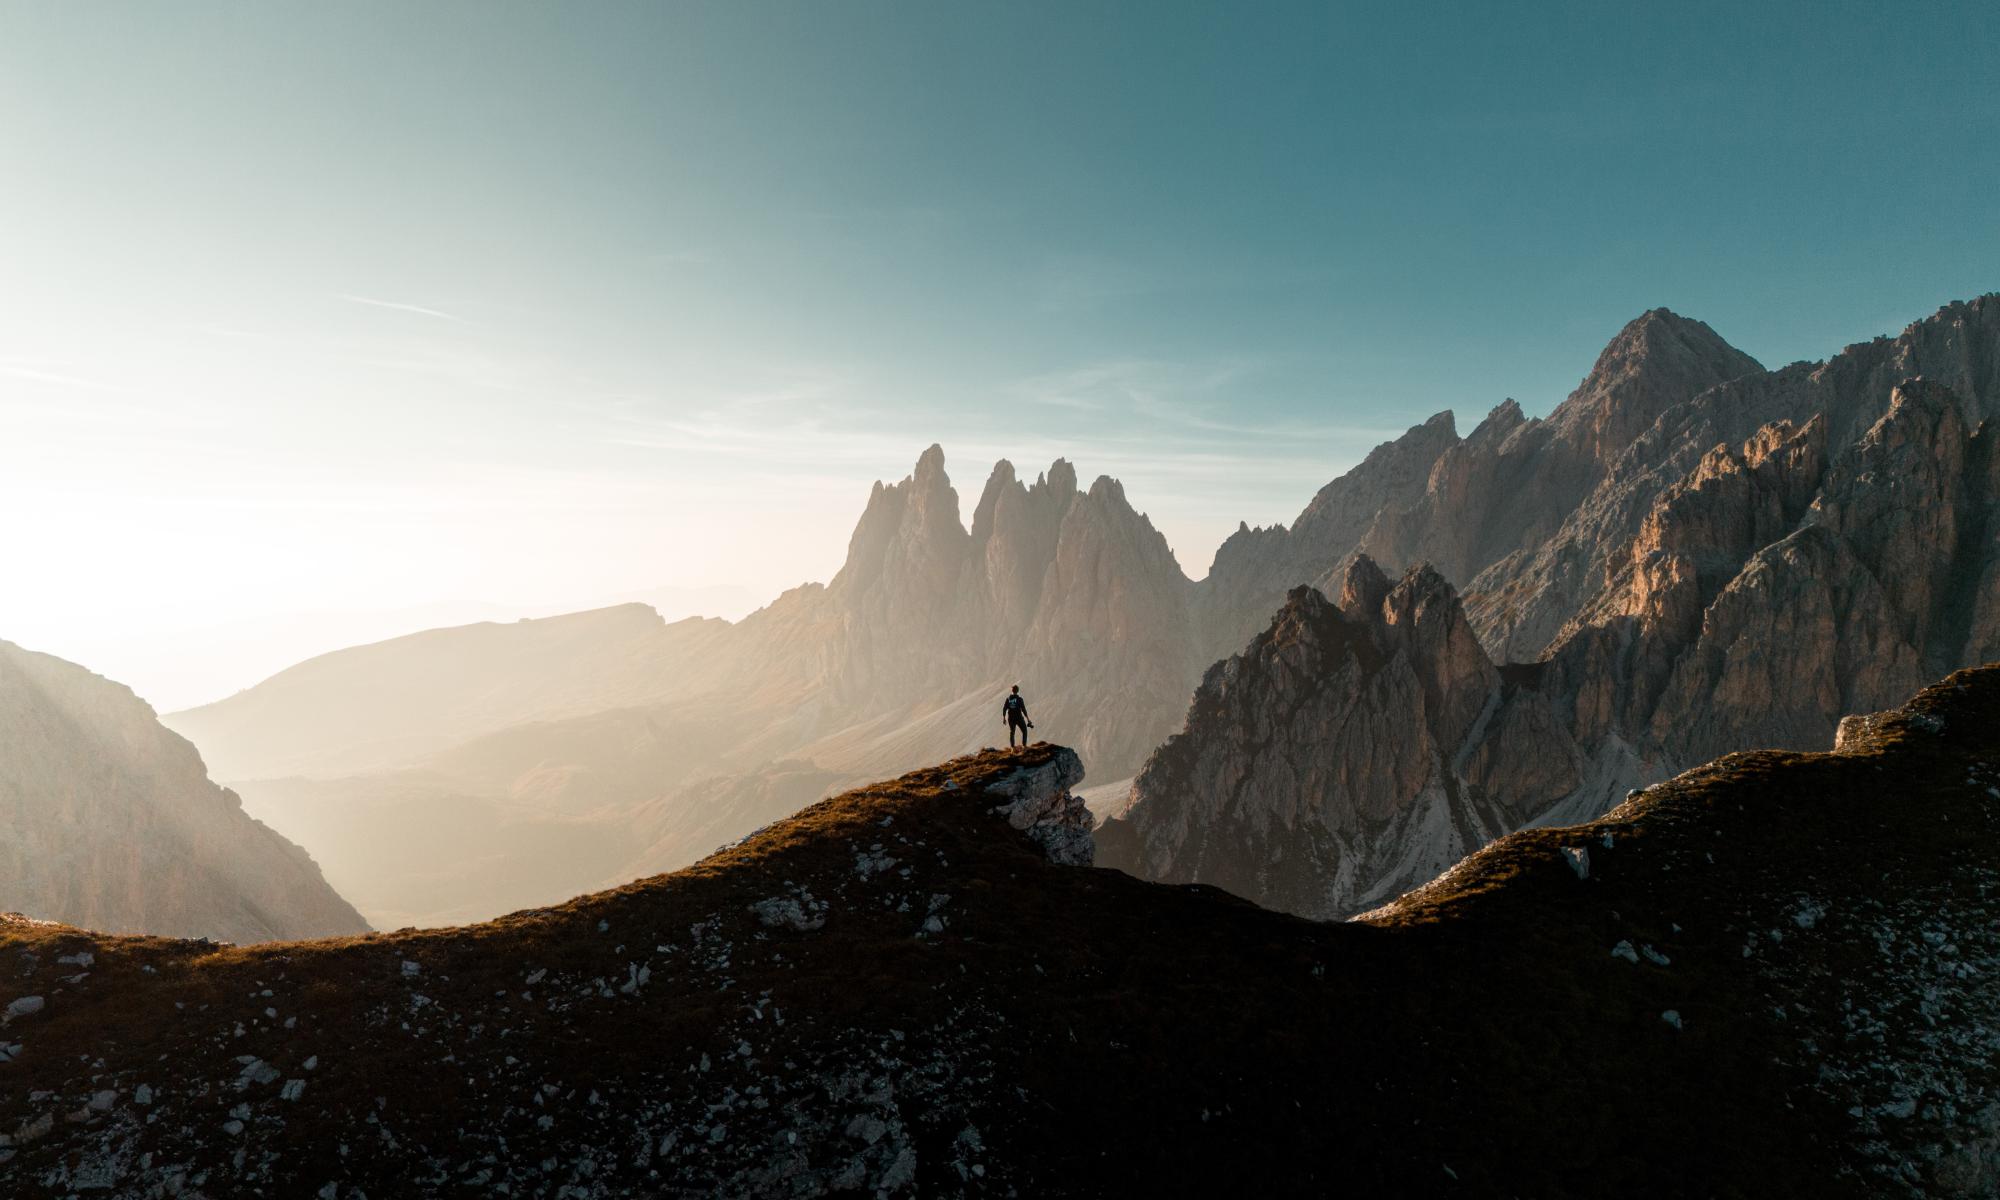 Men in the dolomites - South Tyrol